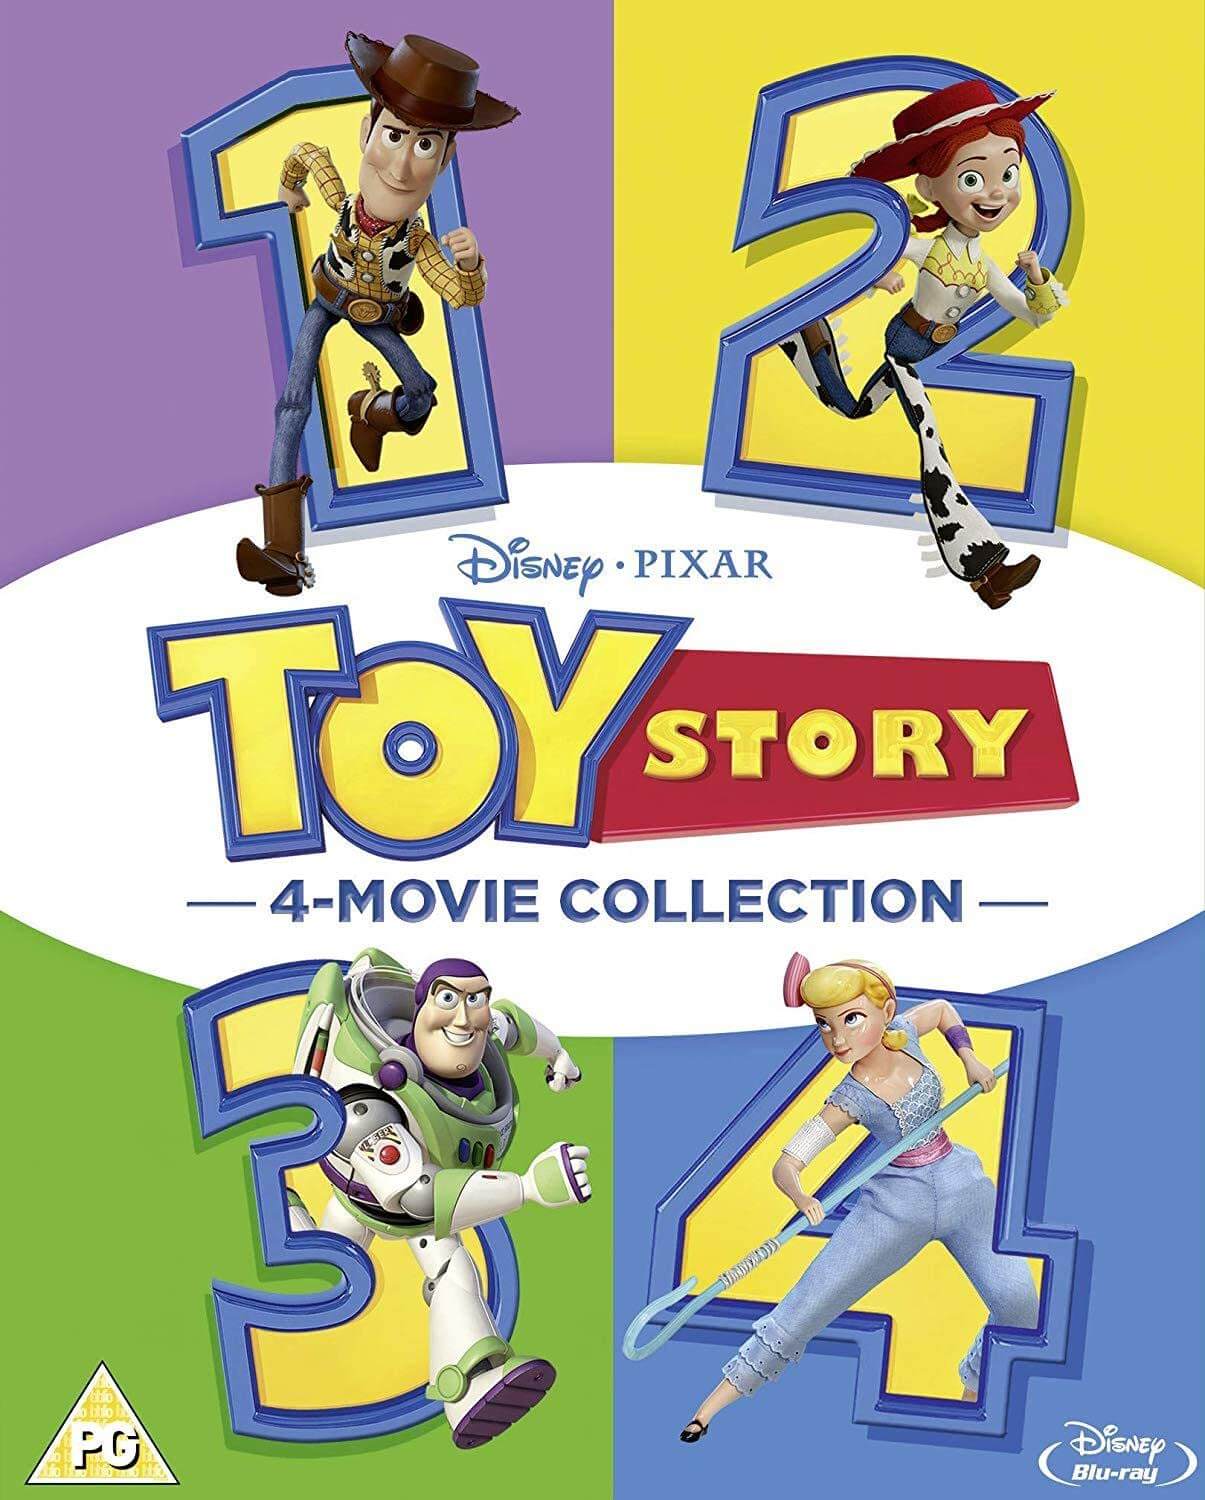 "Toy Story" 4-Movie Collection